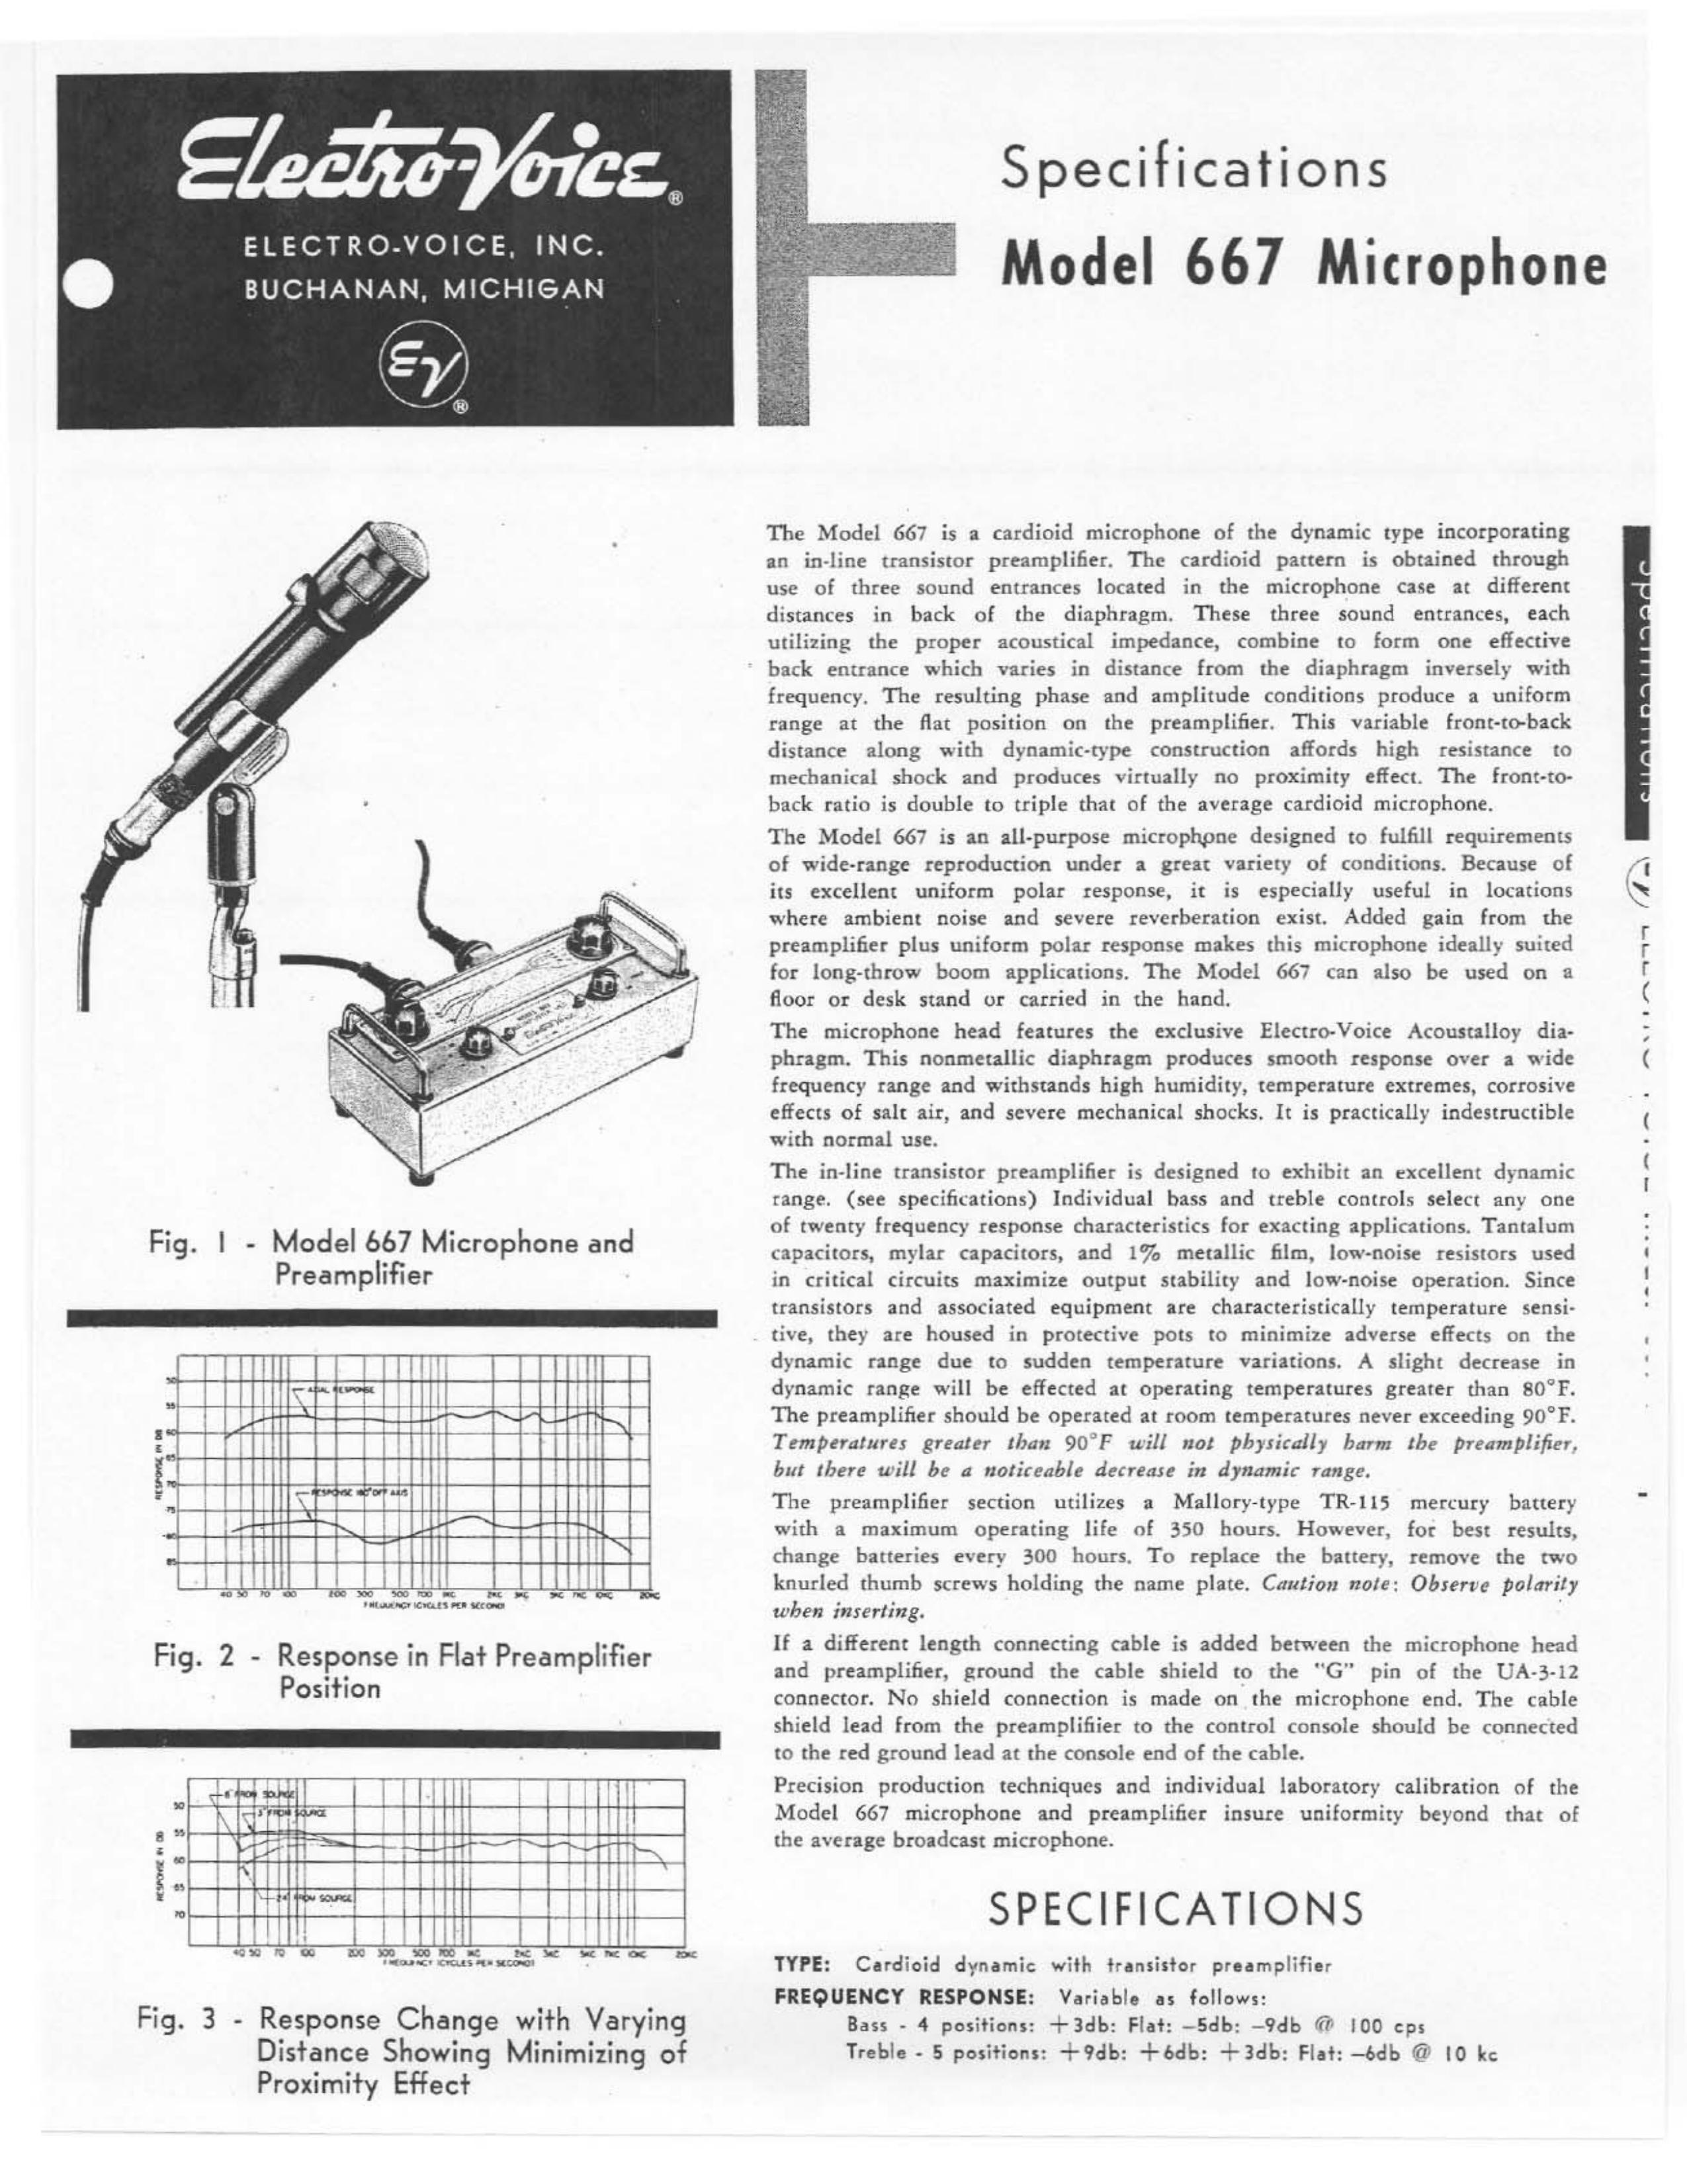 Electro-Voice 667 Microphone User Manual